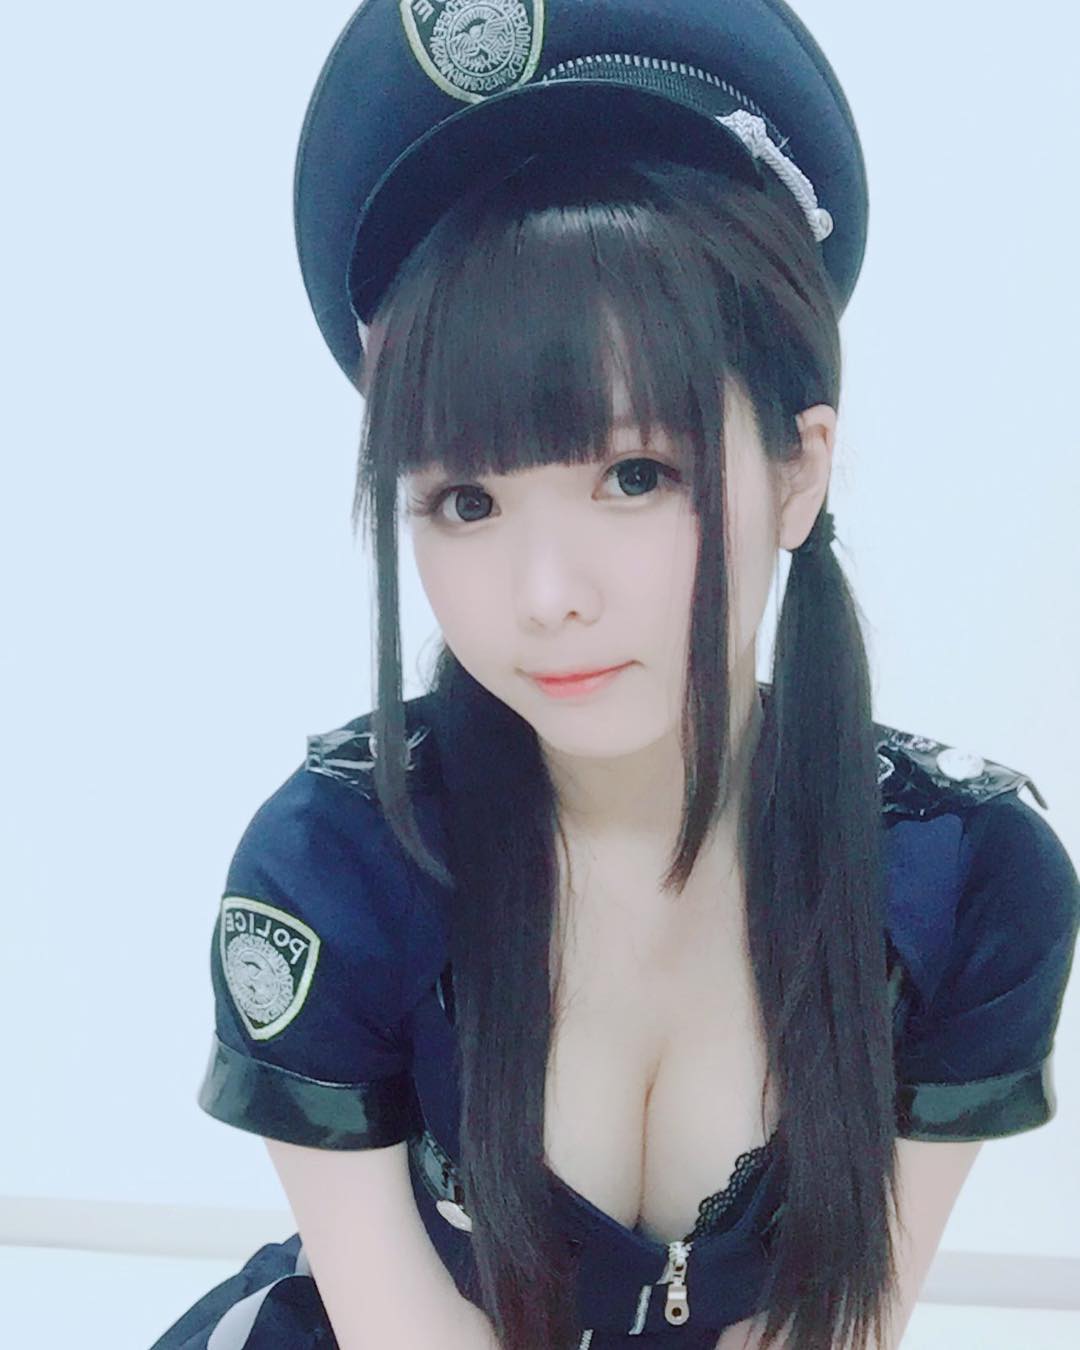 Shimo Tsuki is a Cute Police Girl with Perfect Breasts